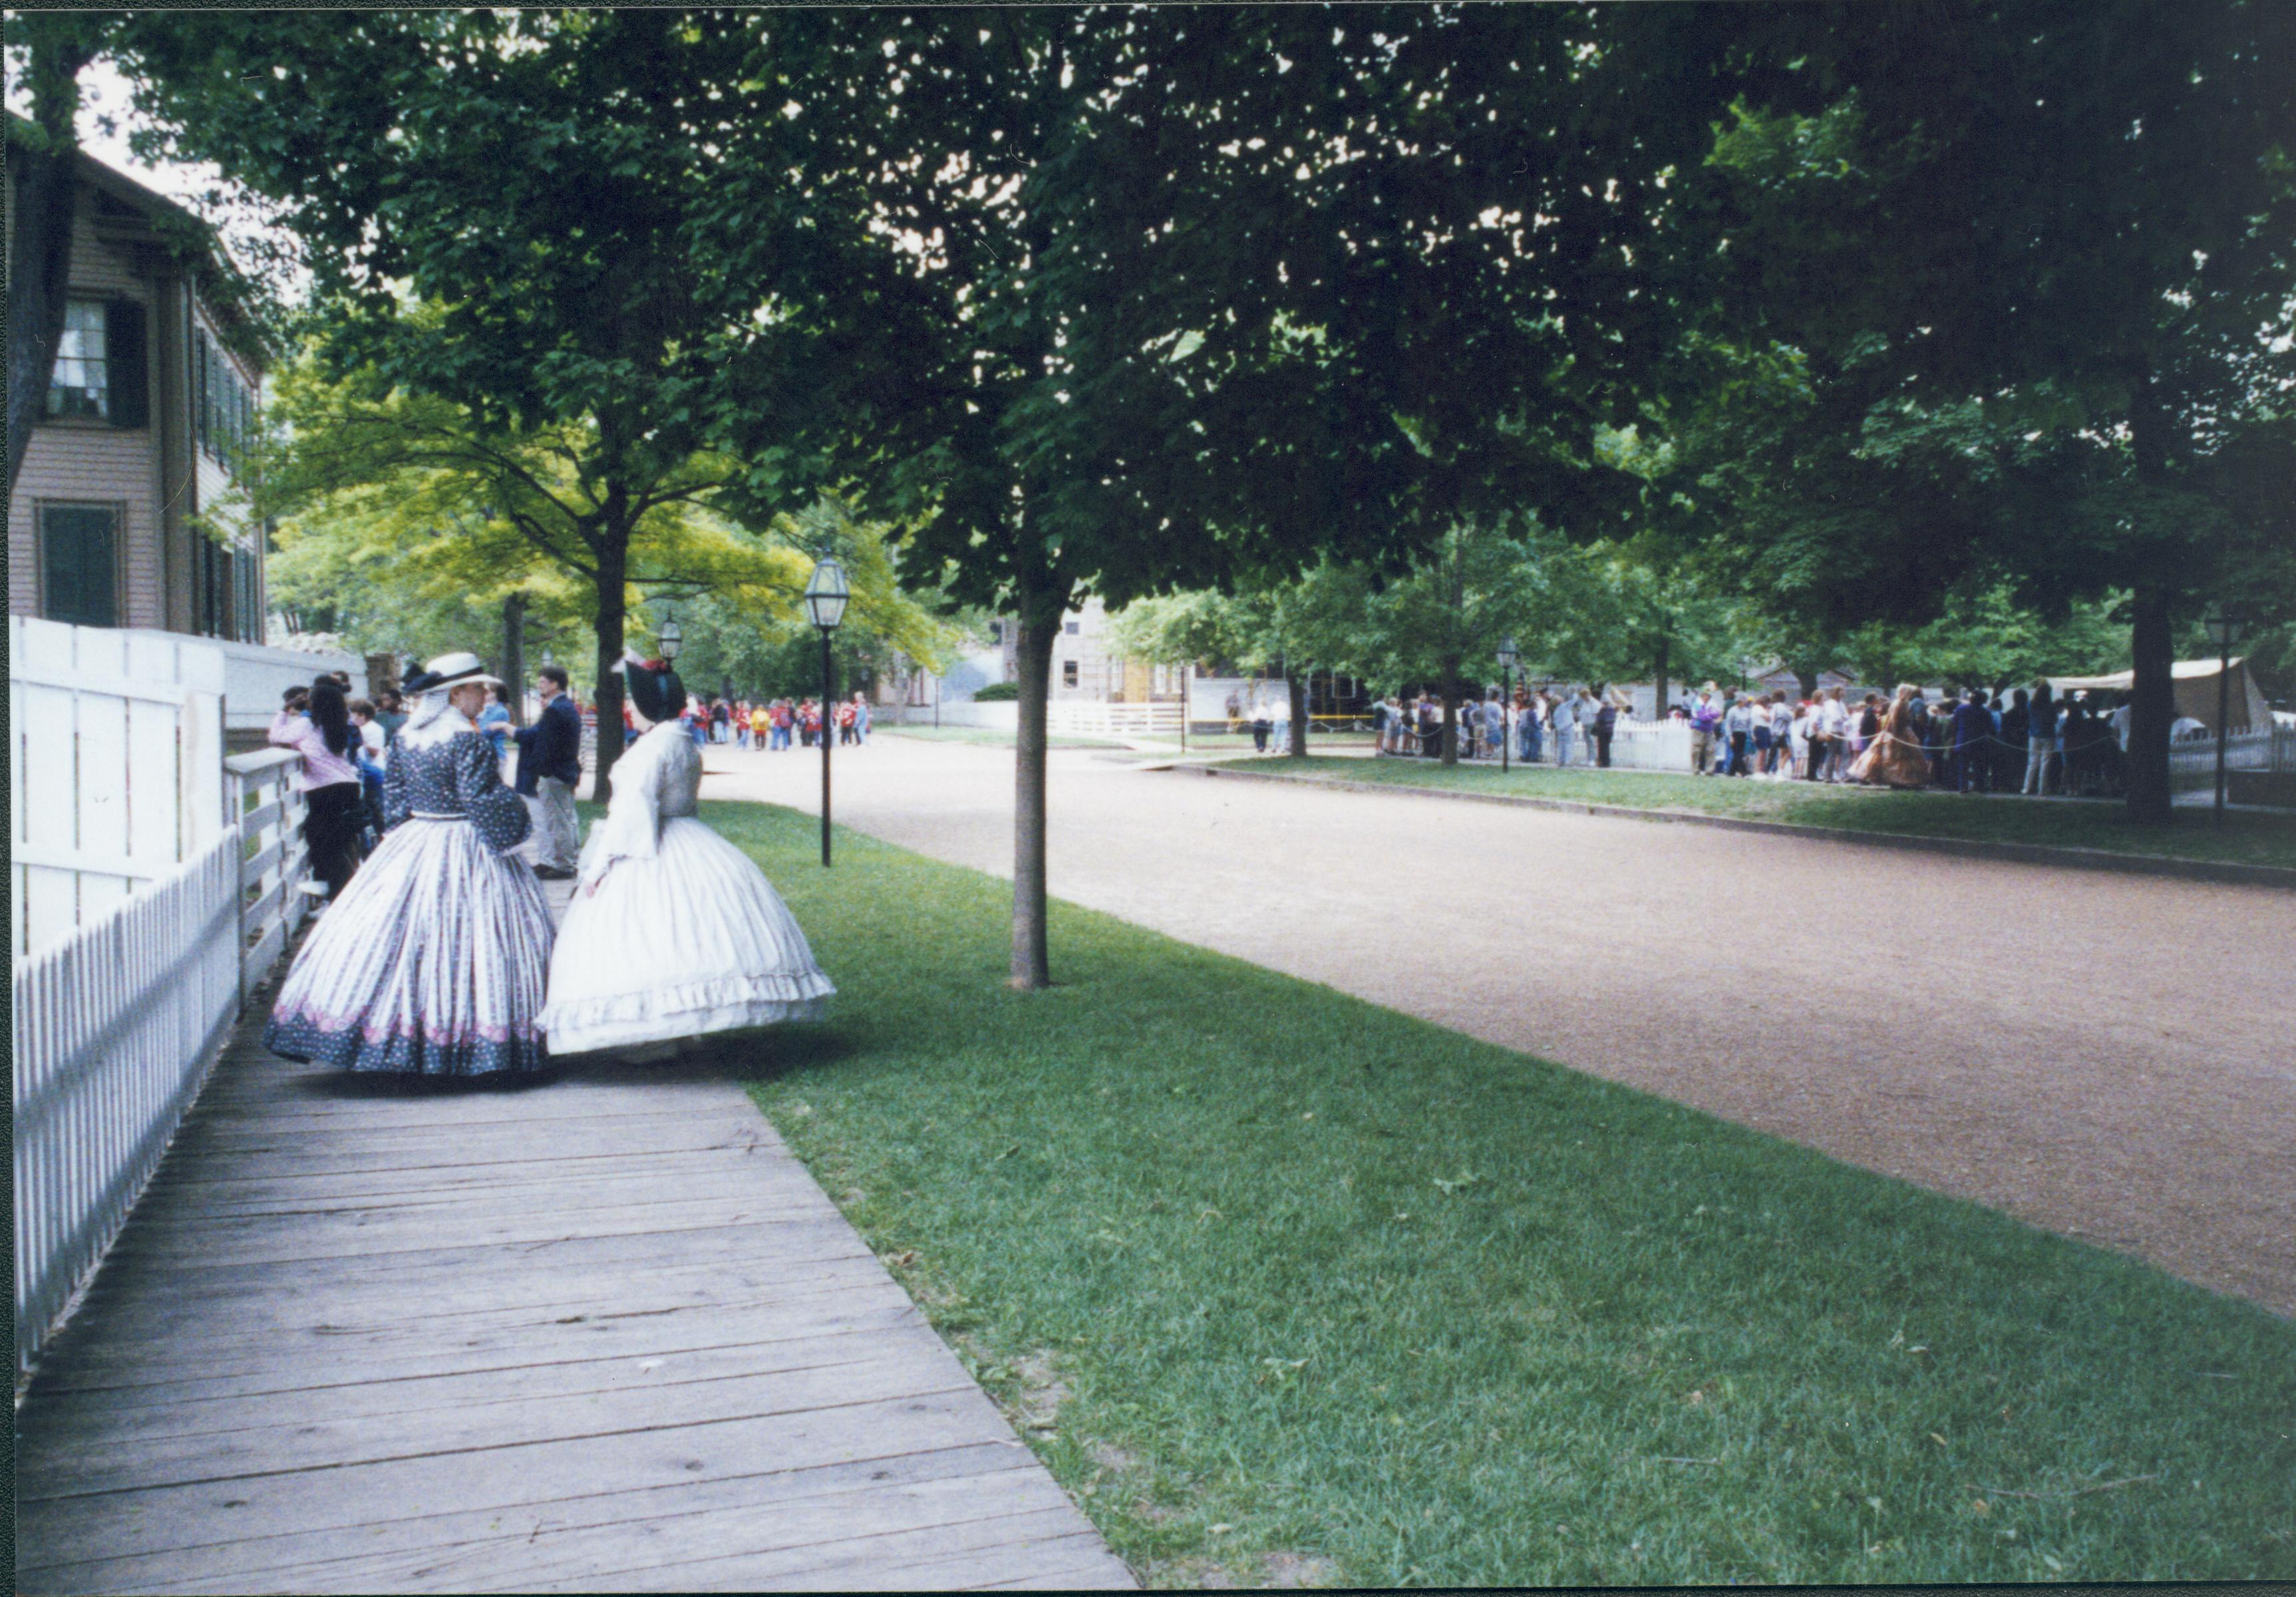 Iles School Living History program - Program Coordinators Paula Shotwell and Margie Atkins in period clothing chat on boardwalk. School groups throughout the park watching performances.  Lincoln Home in background left. Corneau and Miller houses just visible in far background center. Looking south from boardwalk on East side of 8th Street Iles School, living history, school groups, Lincoln Home, Corneau, Miller, 8th Street